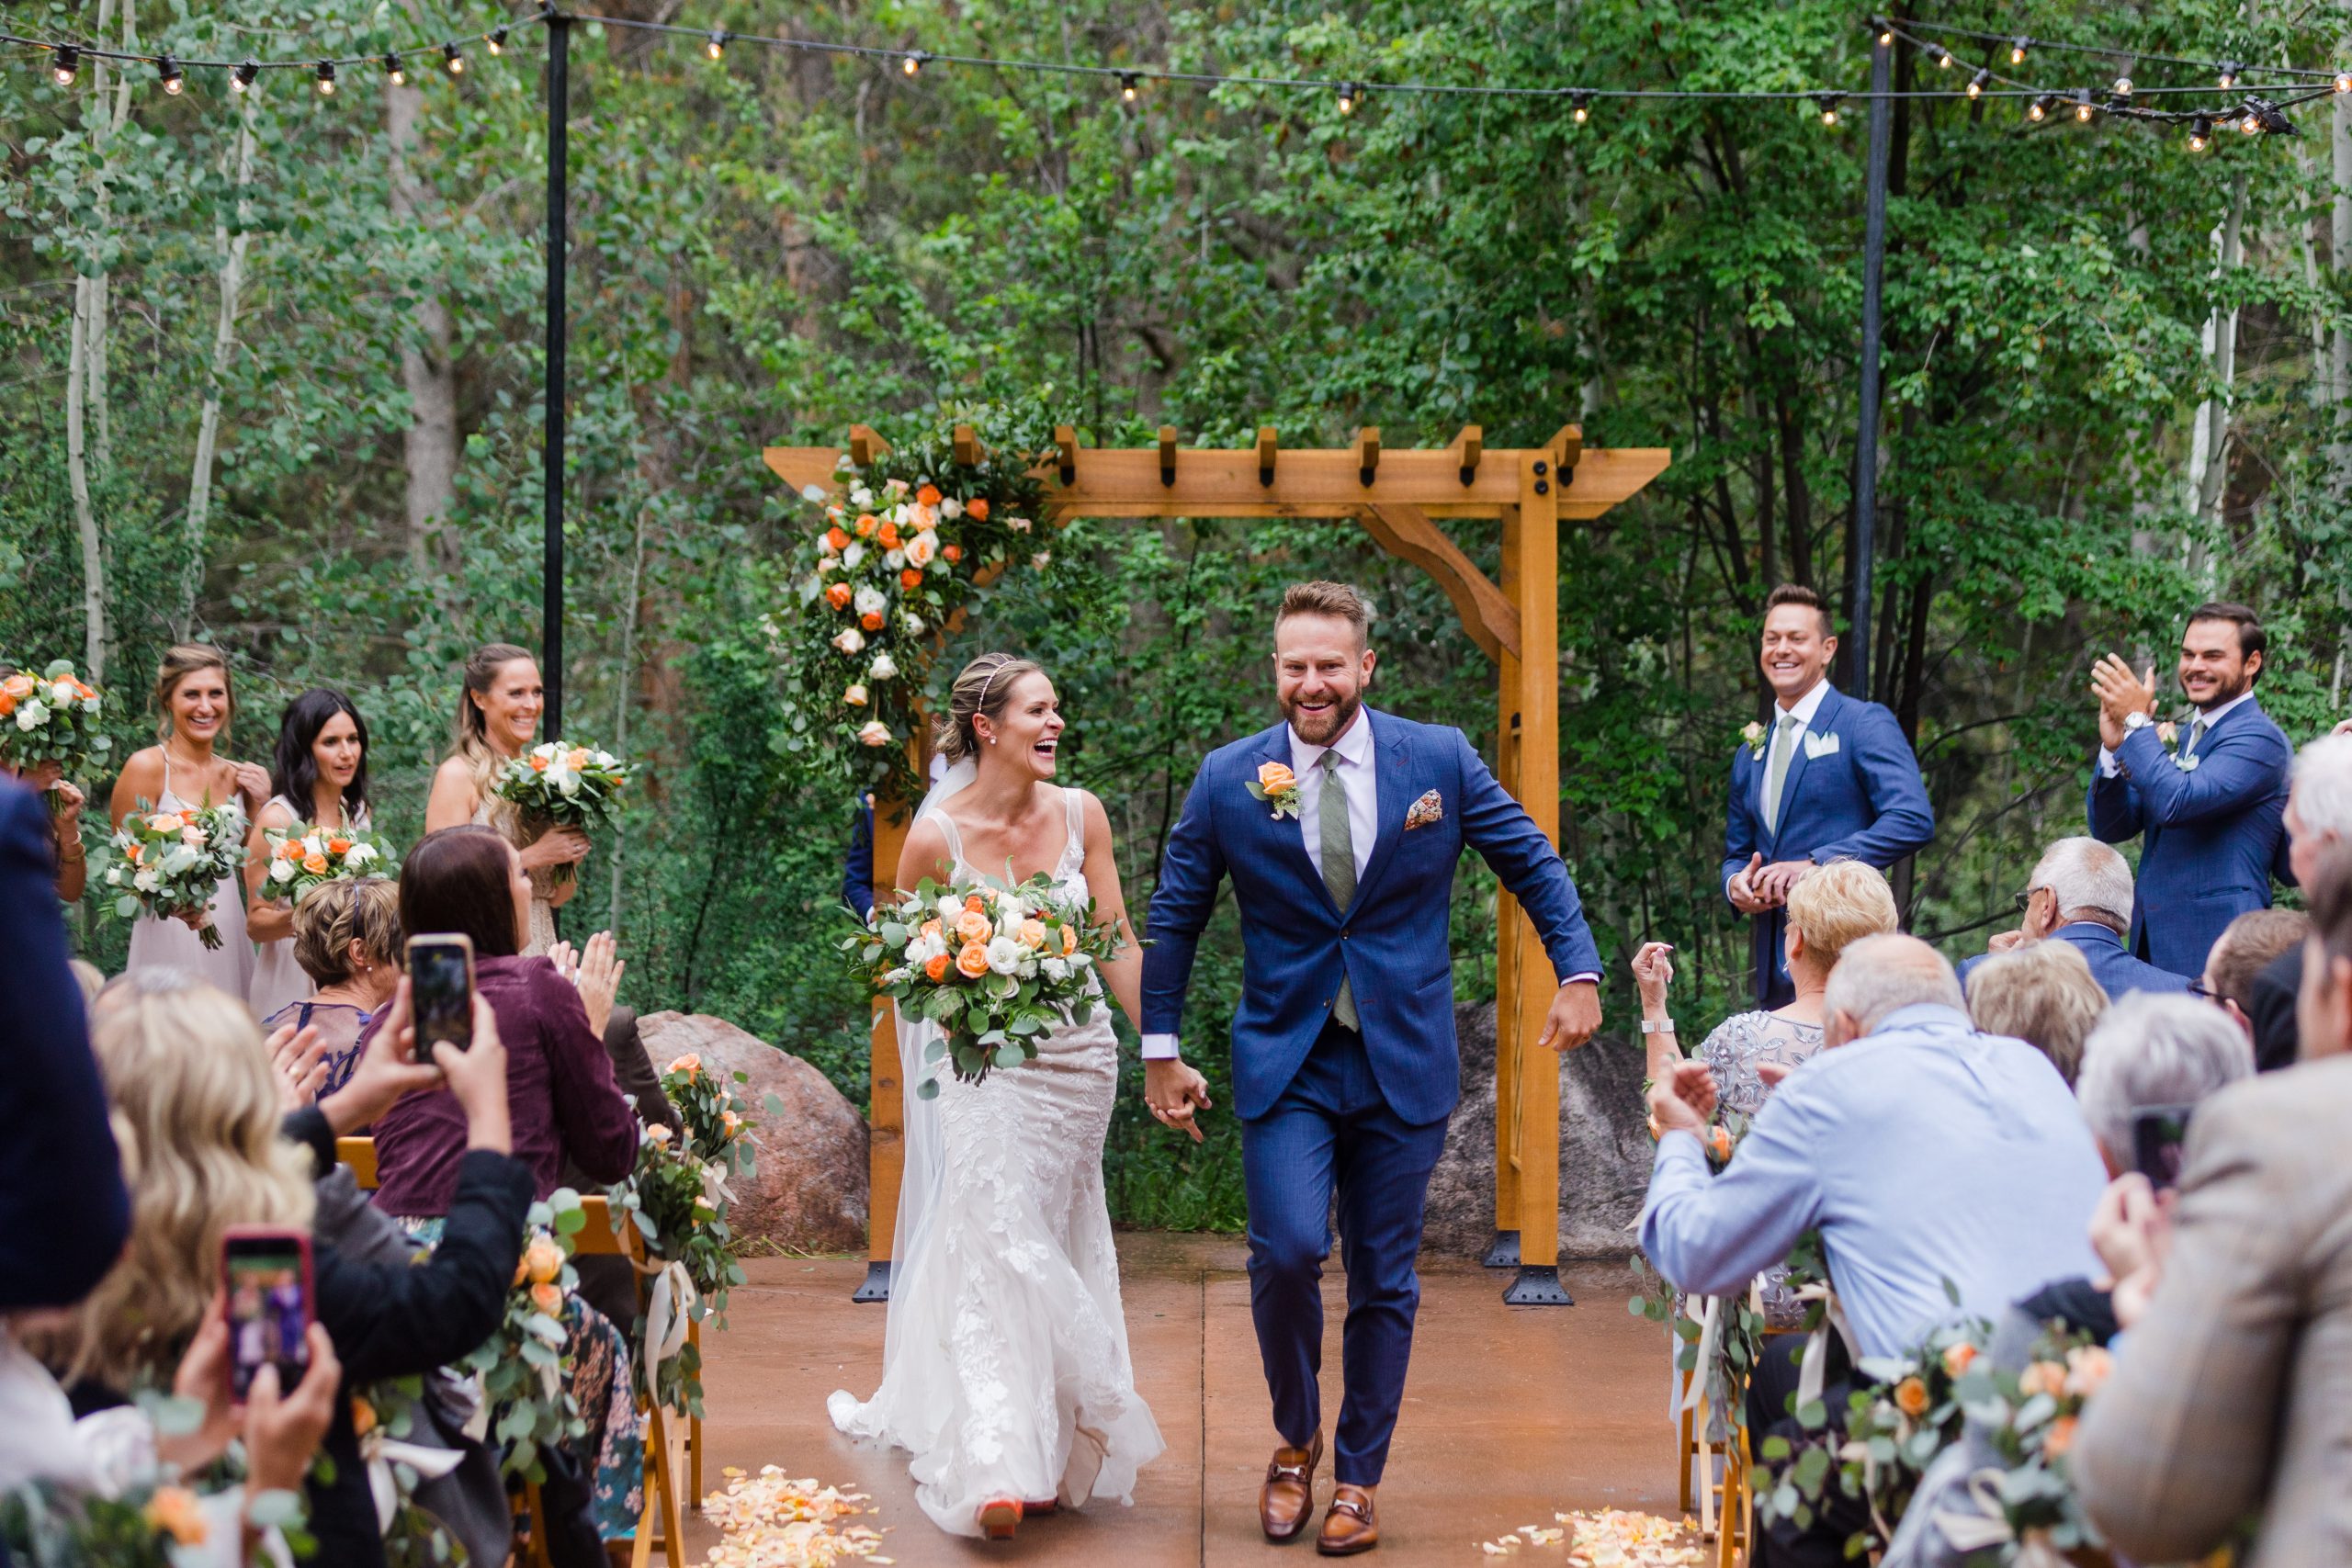 Bride Wearing Greenley By Maggie Sottero Walking Down The Aisle With Groom In Navy Blue Suit In Outdoor Forest Venue